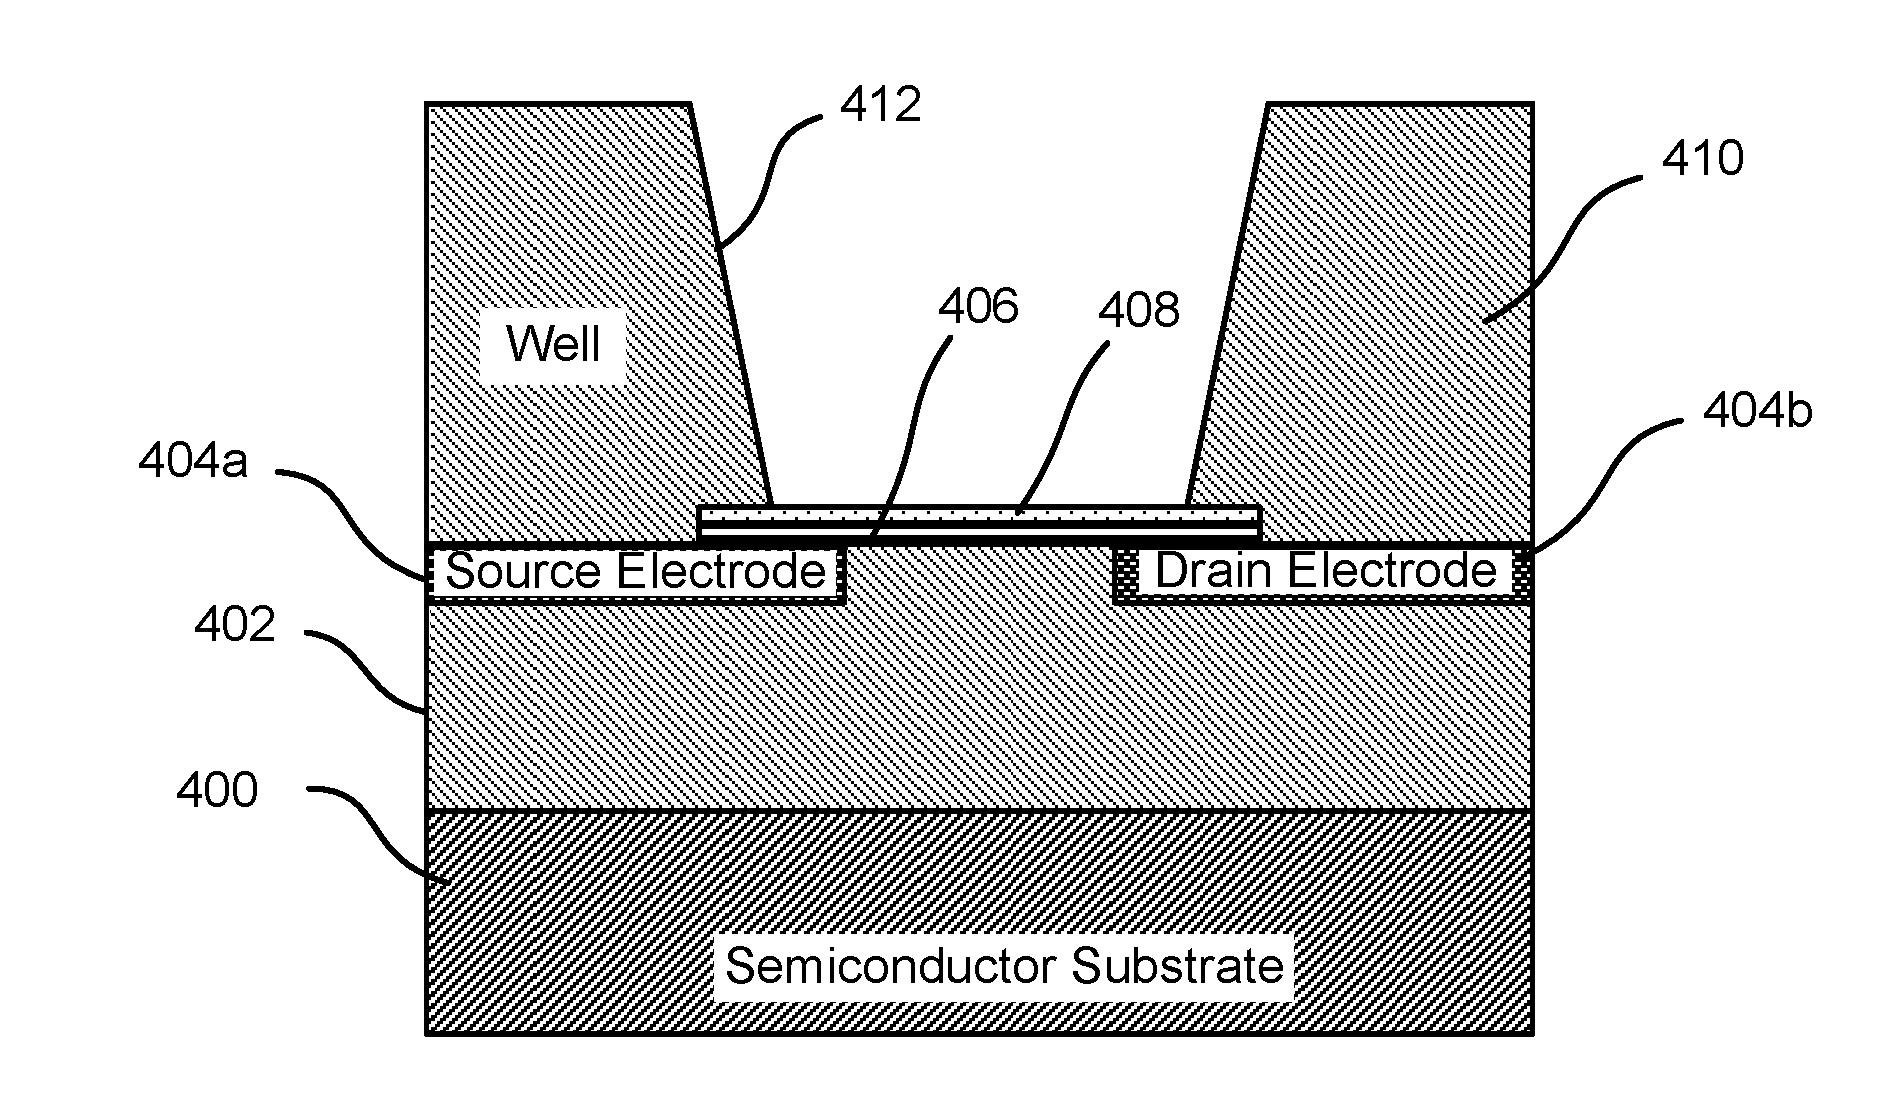 Graphene fet devices, systems, and methods of using the same for sequencing nucleic acids